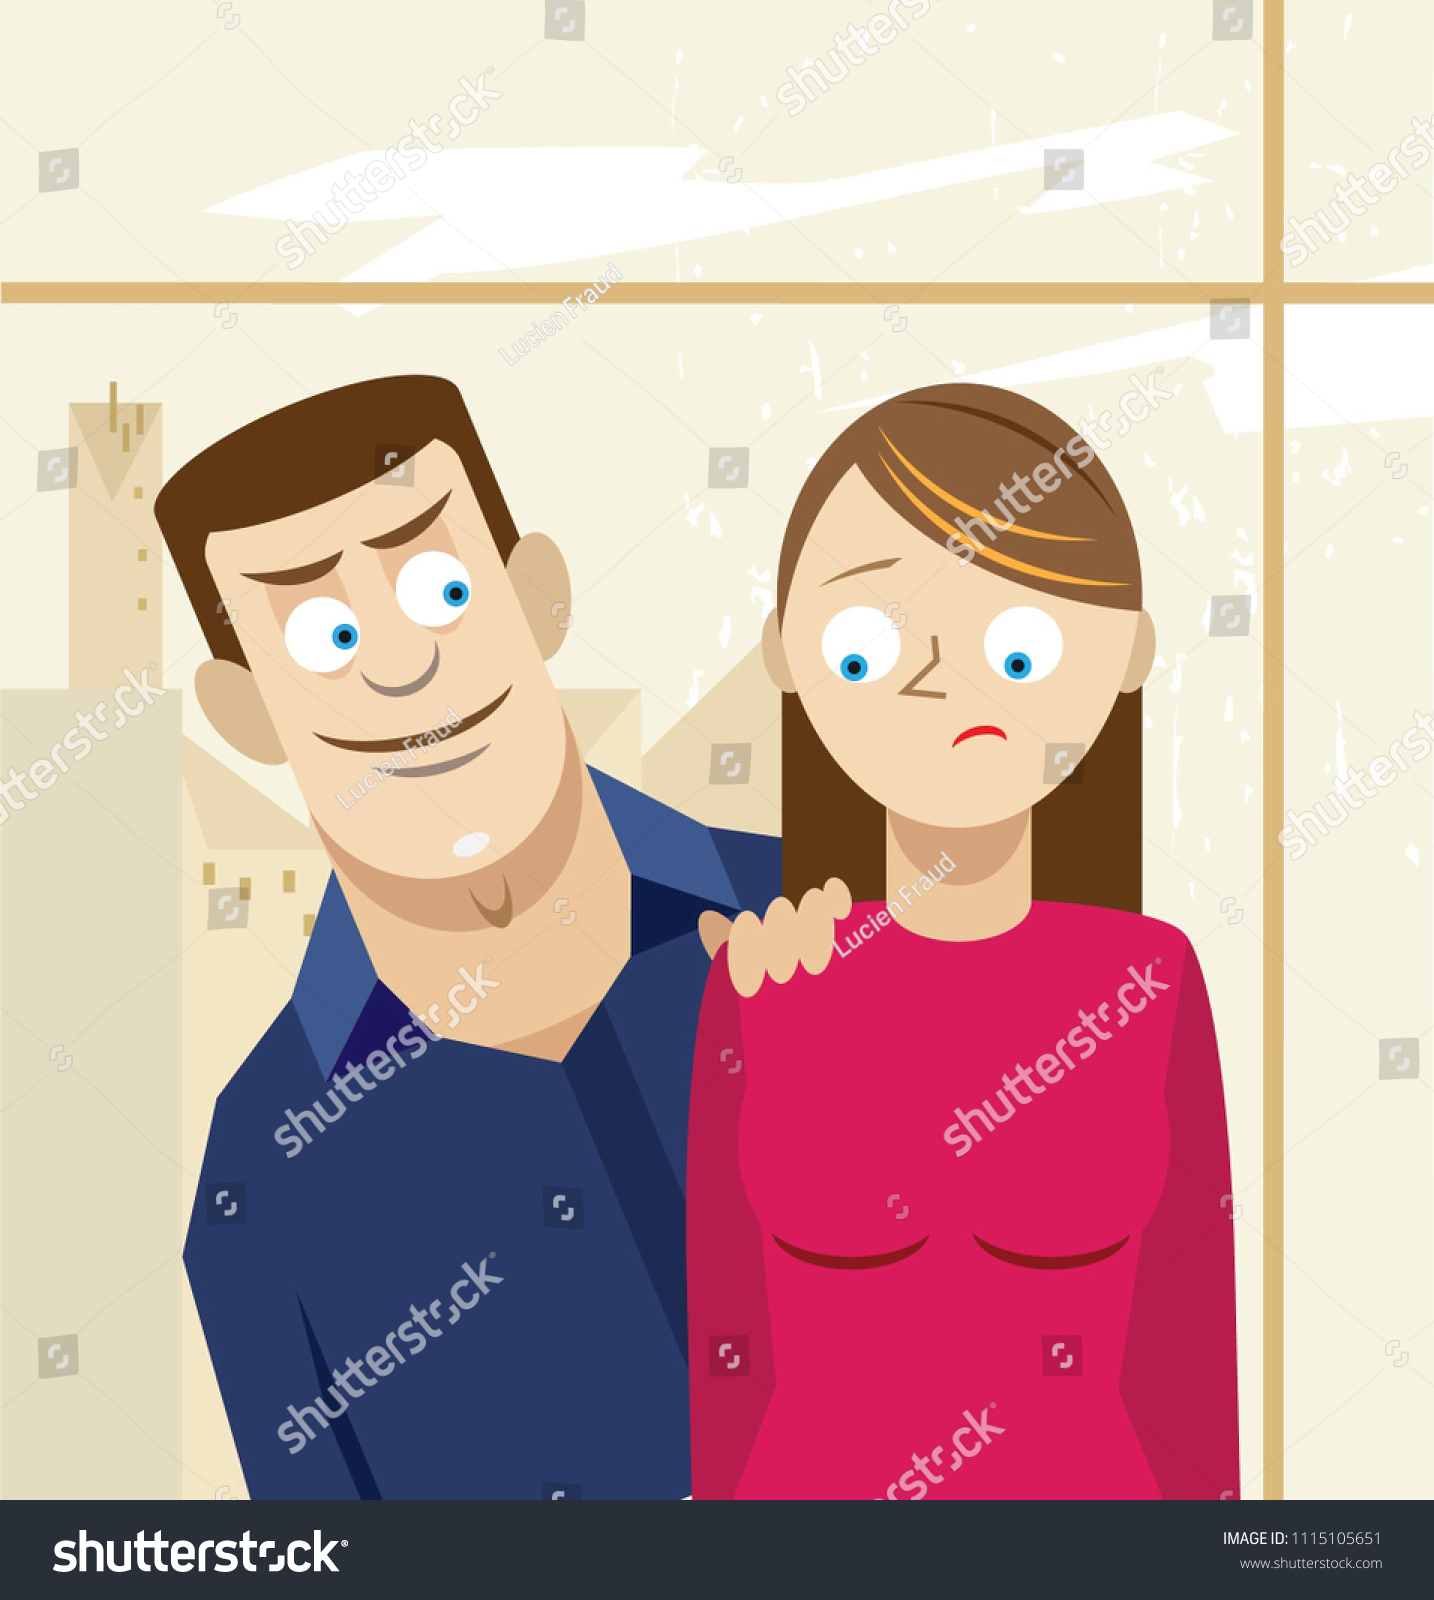 Sexual Harassment Workplace Stock Vector Royalty Free 1115105651 7920